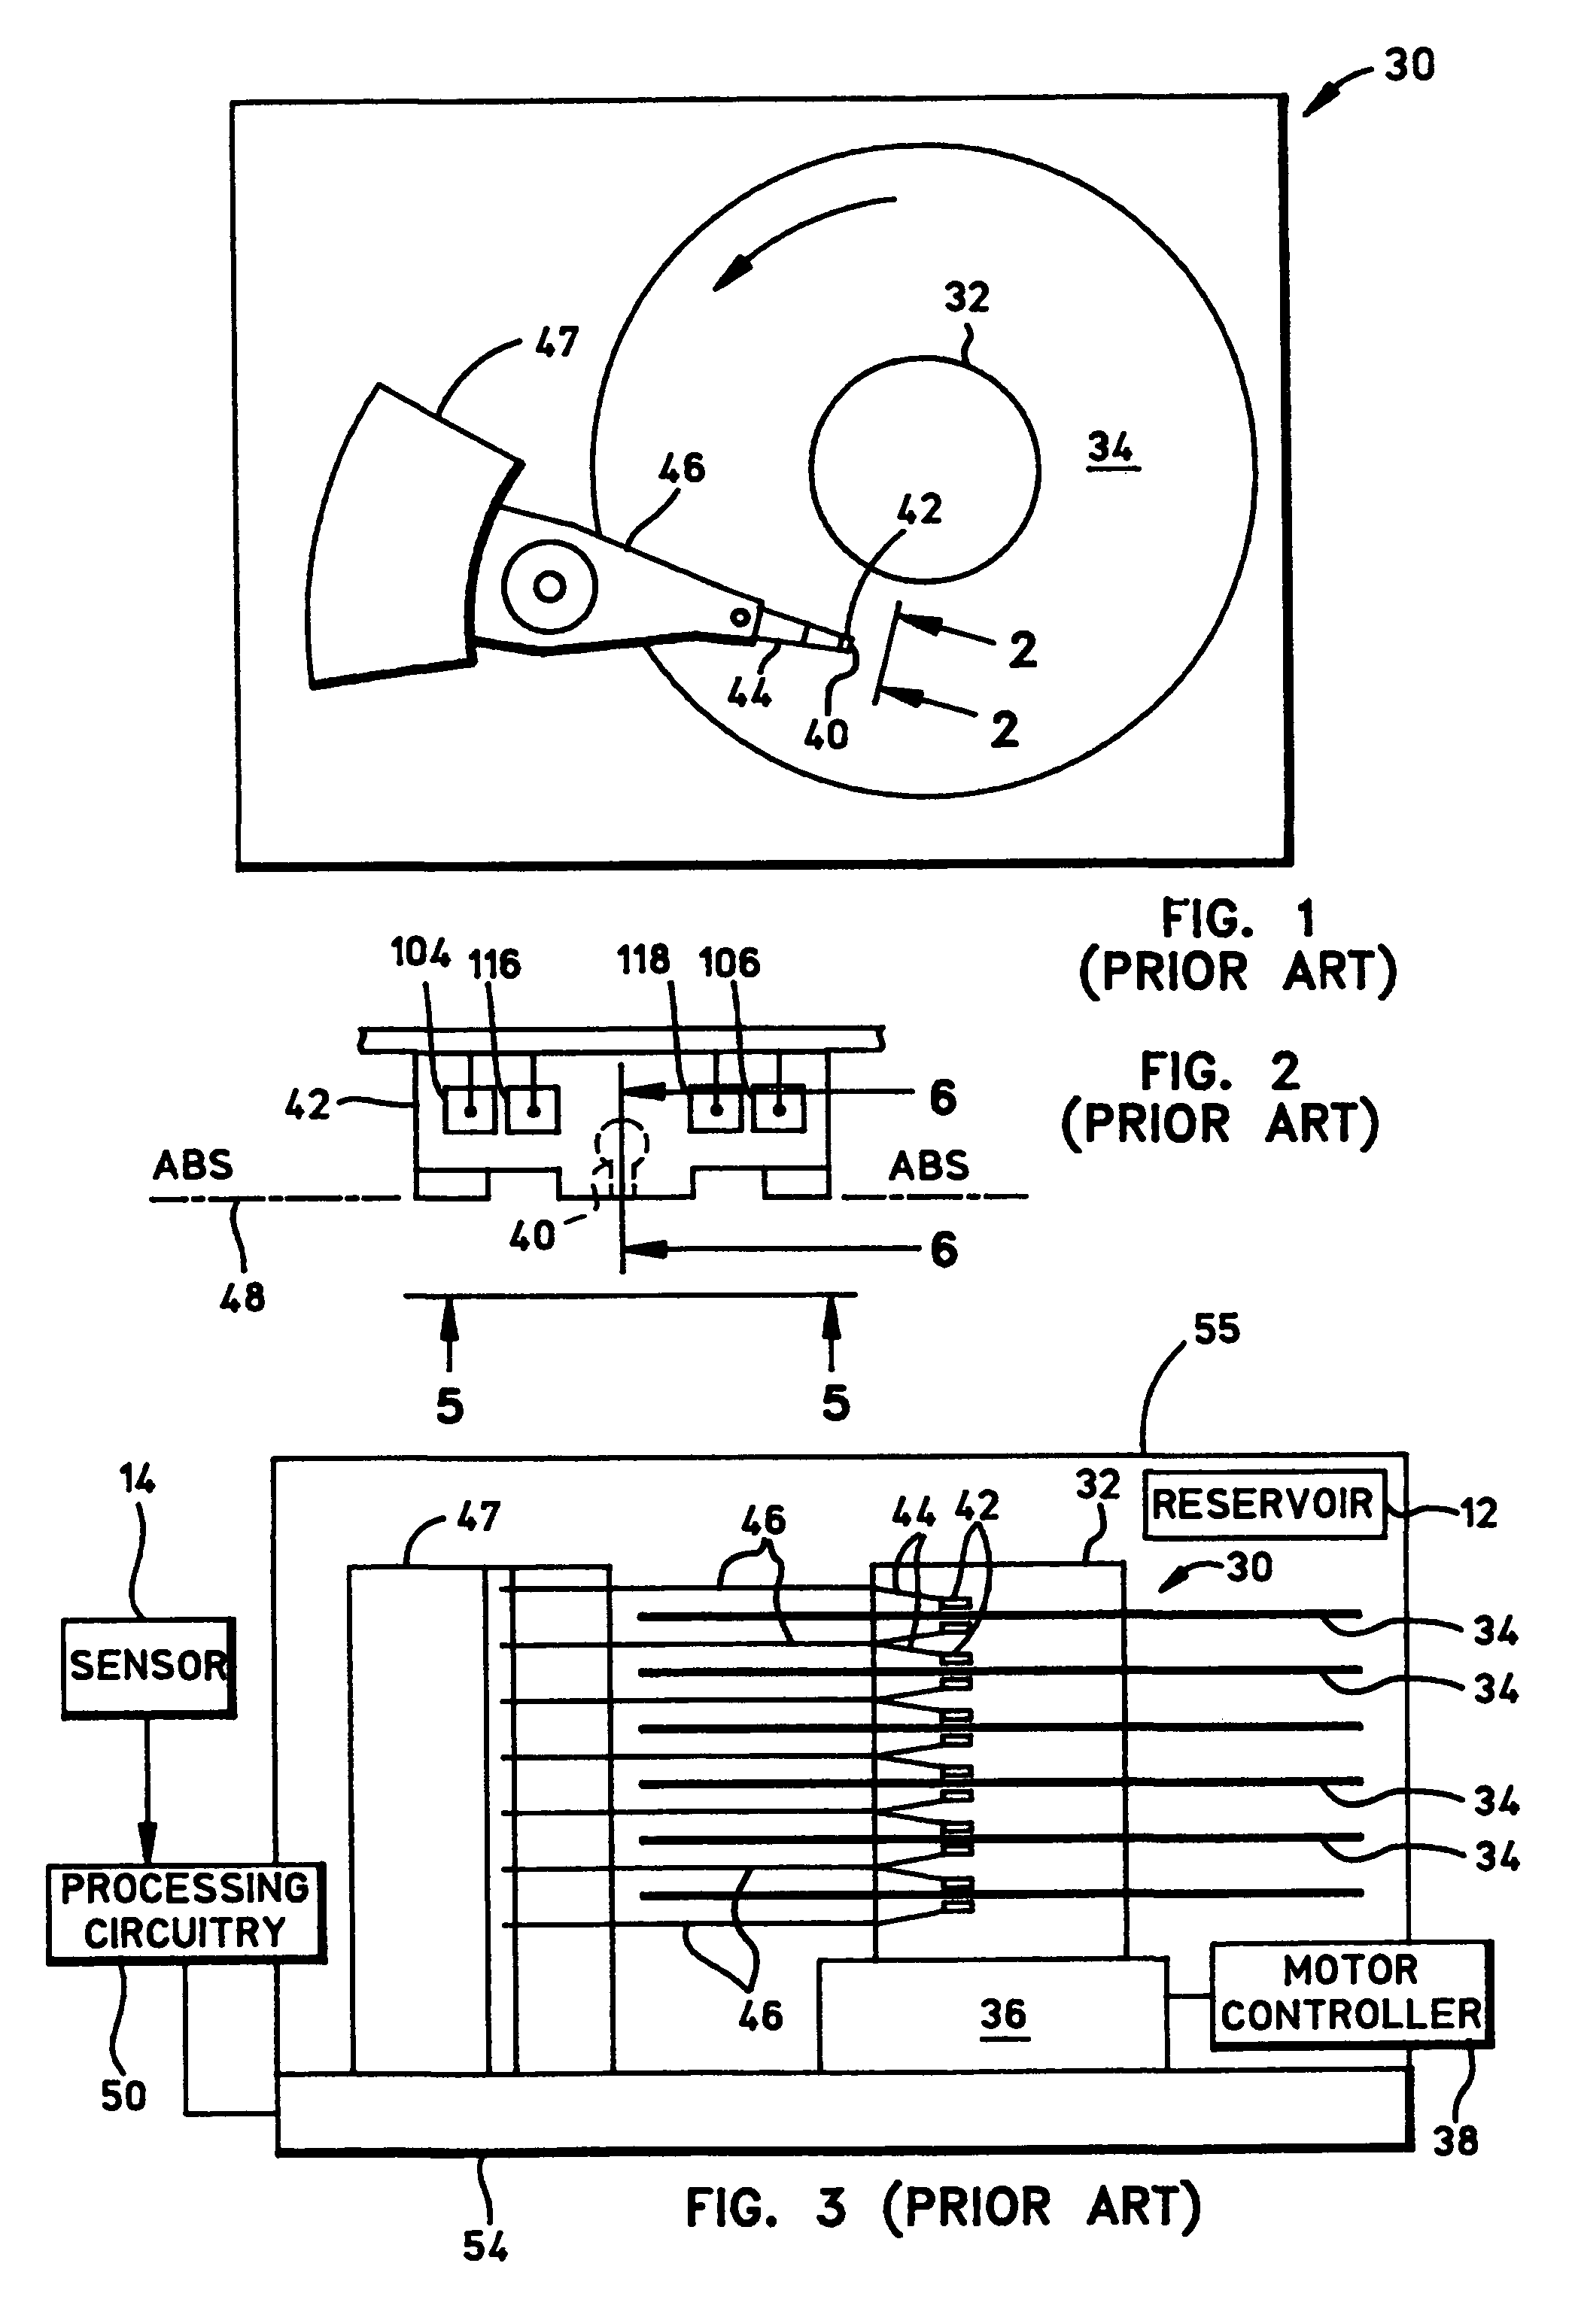 Self-pinned spin valve sensor with stress modification layers for reducing the likelihood of amplitude flip